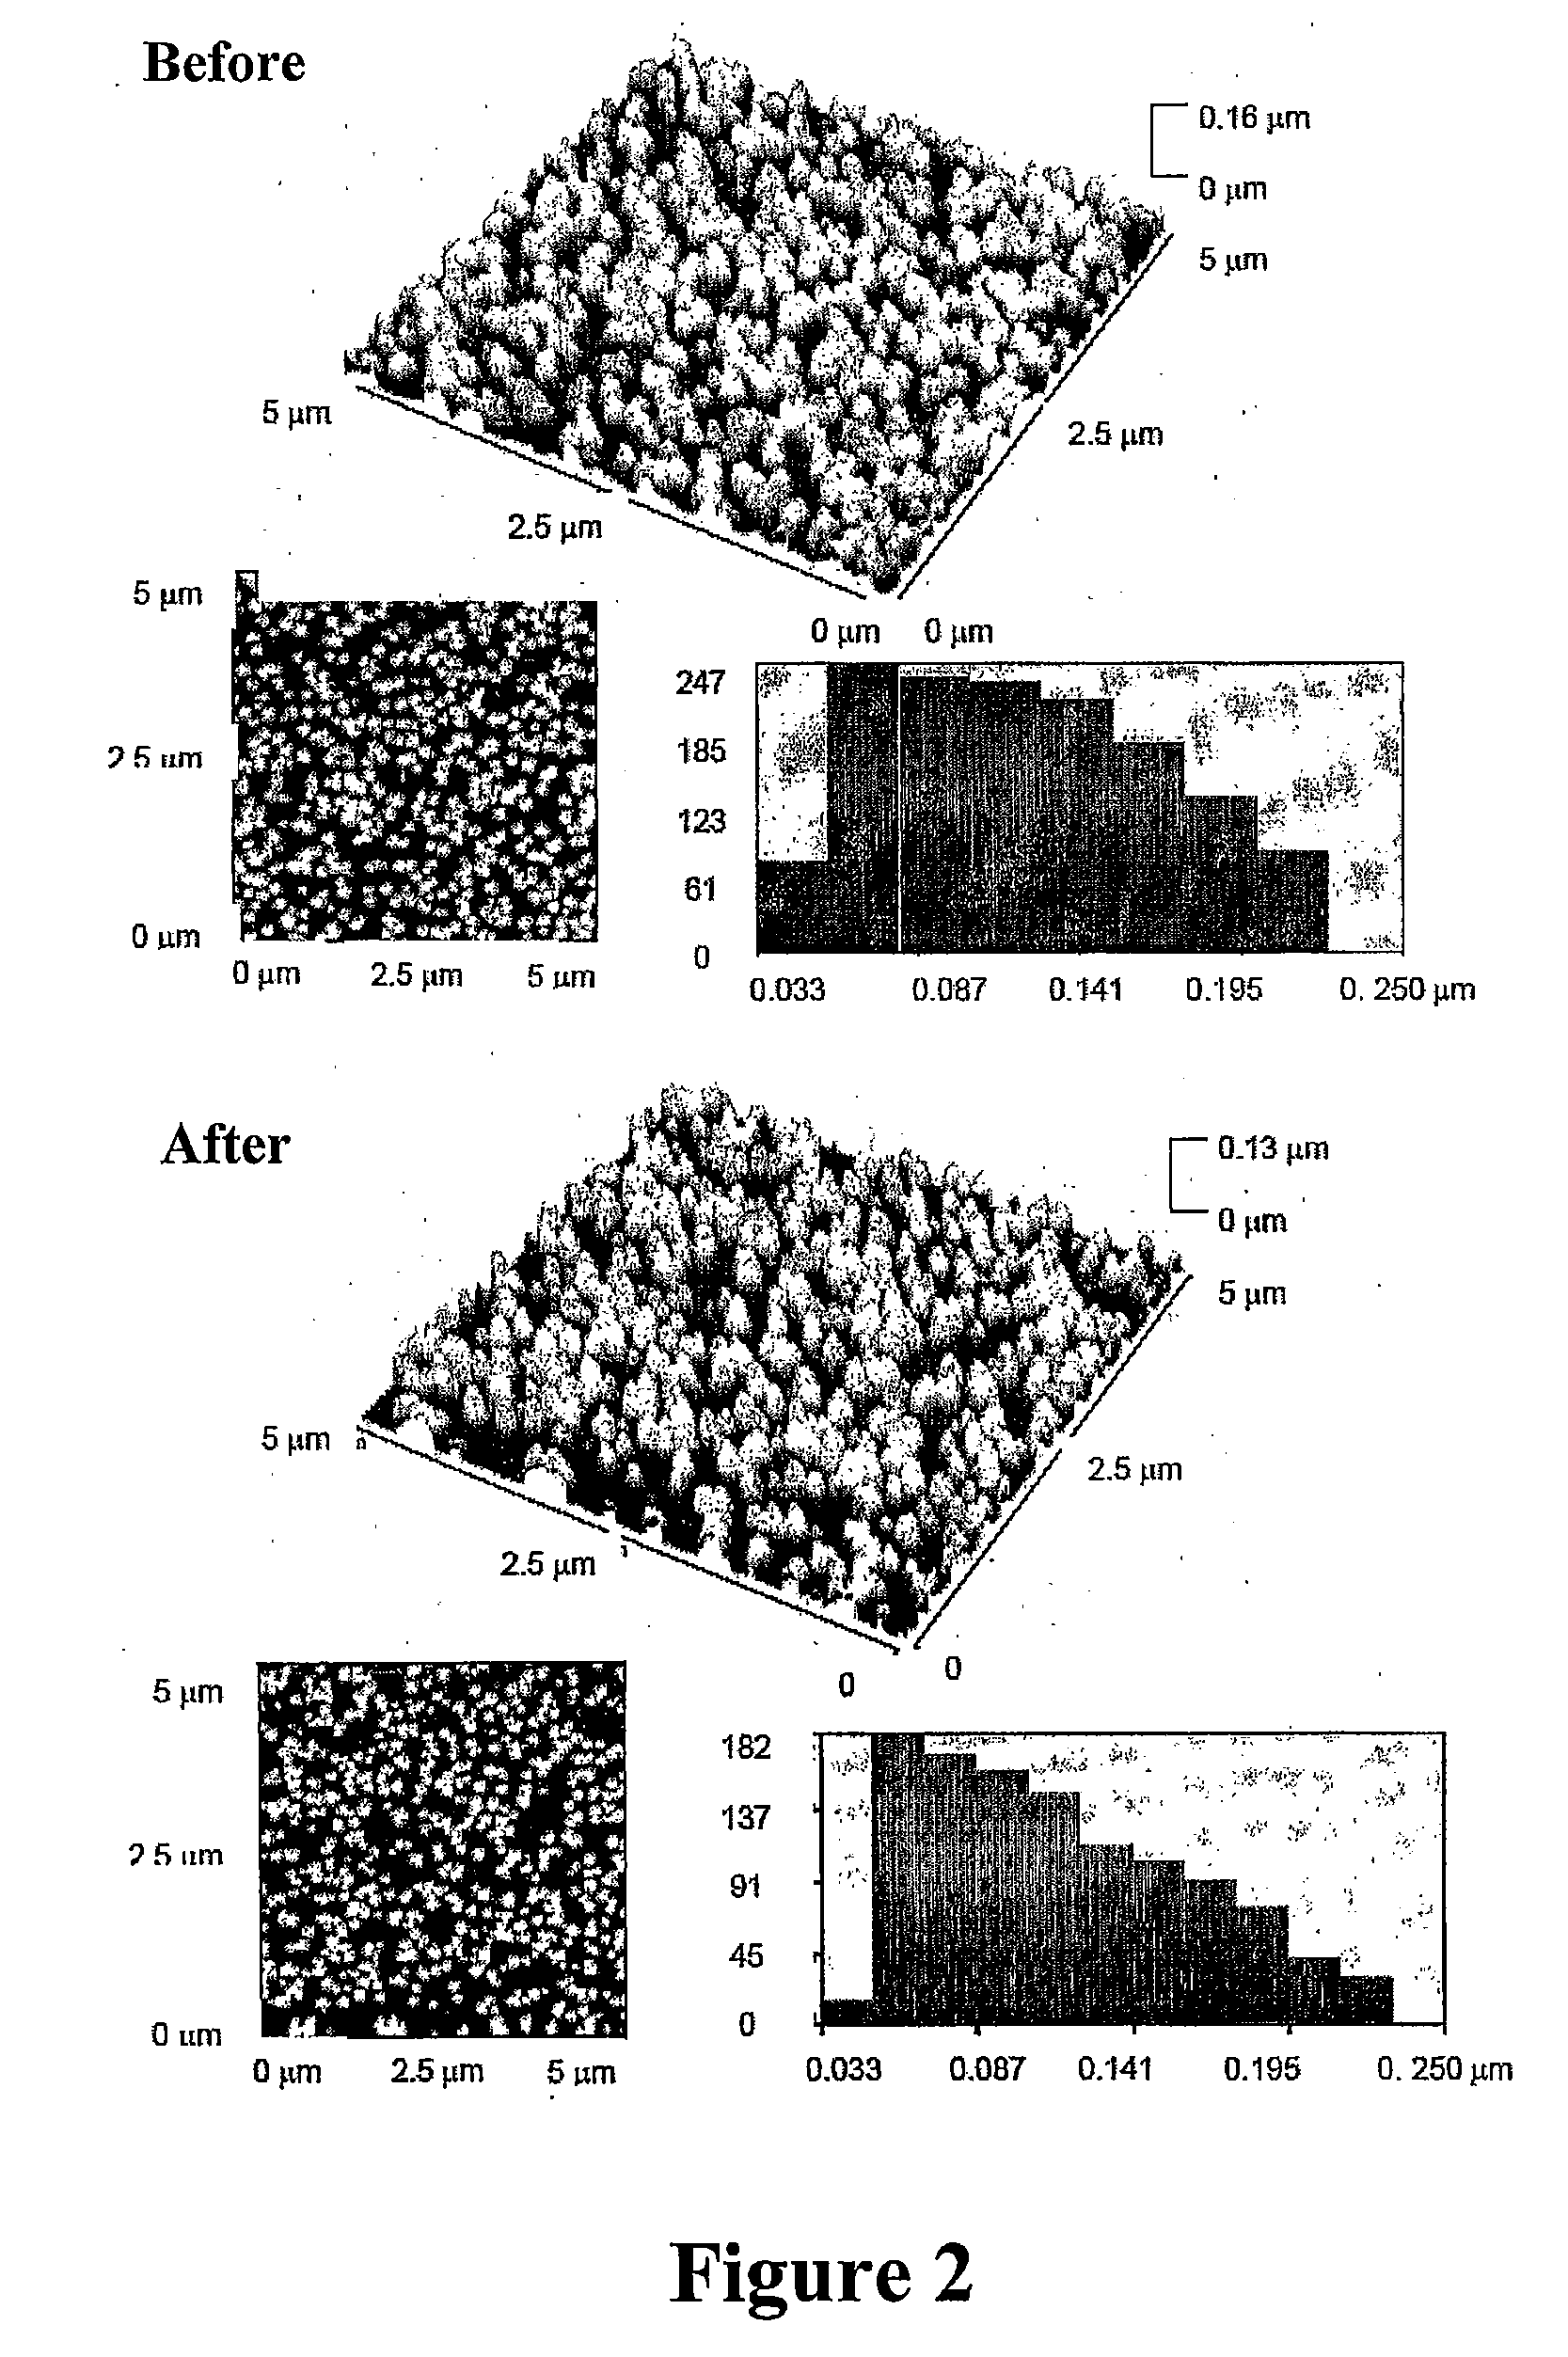 Microwave accelerated assays